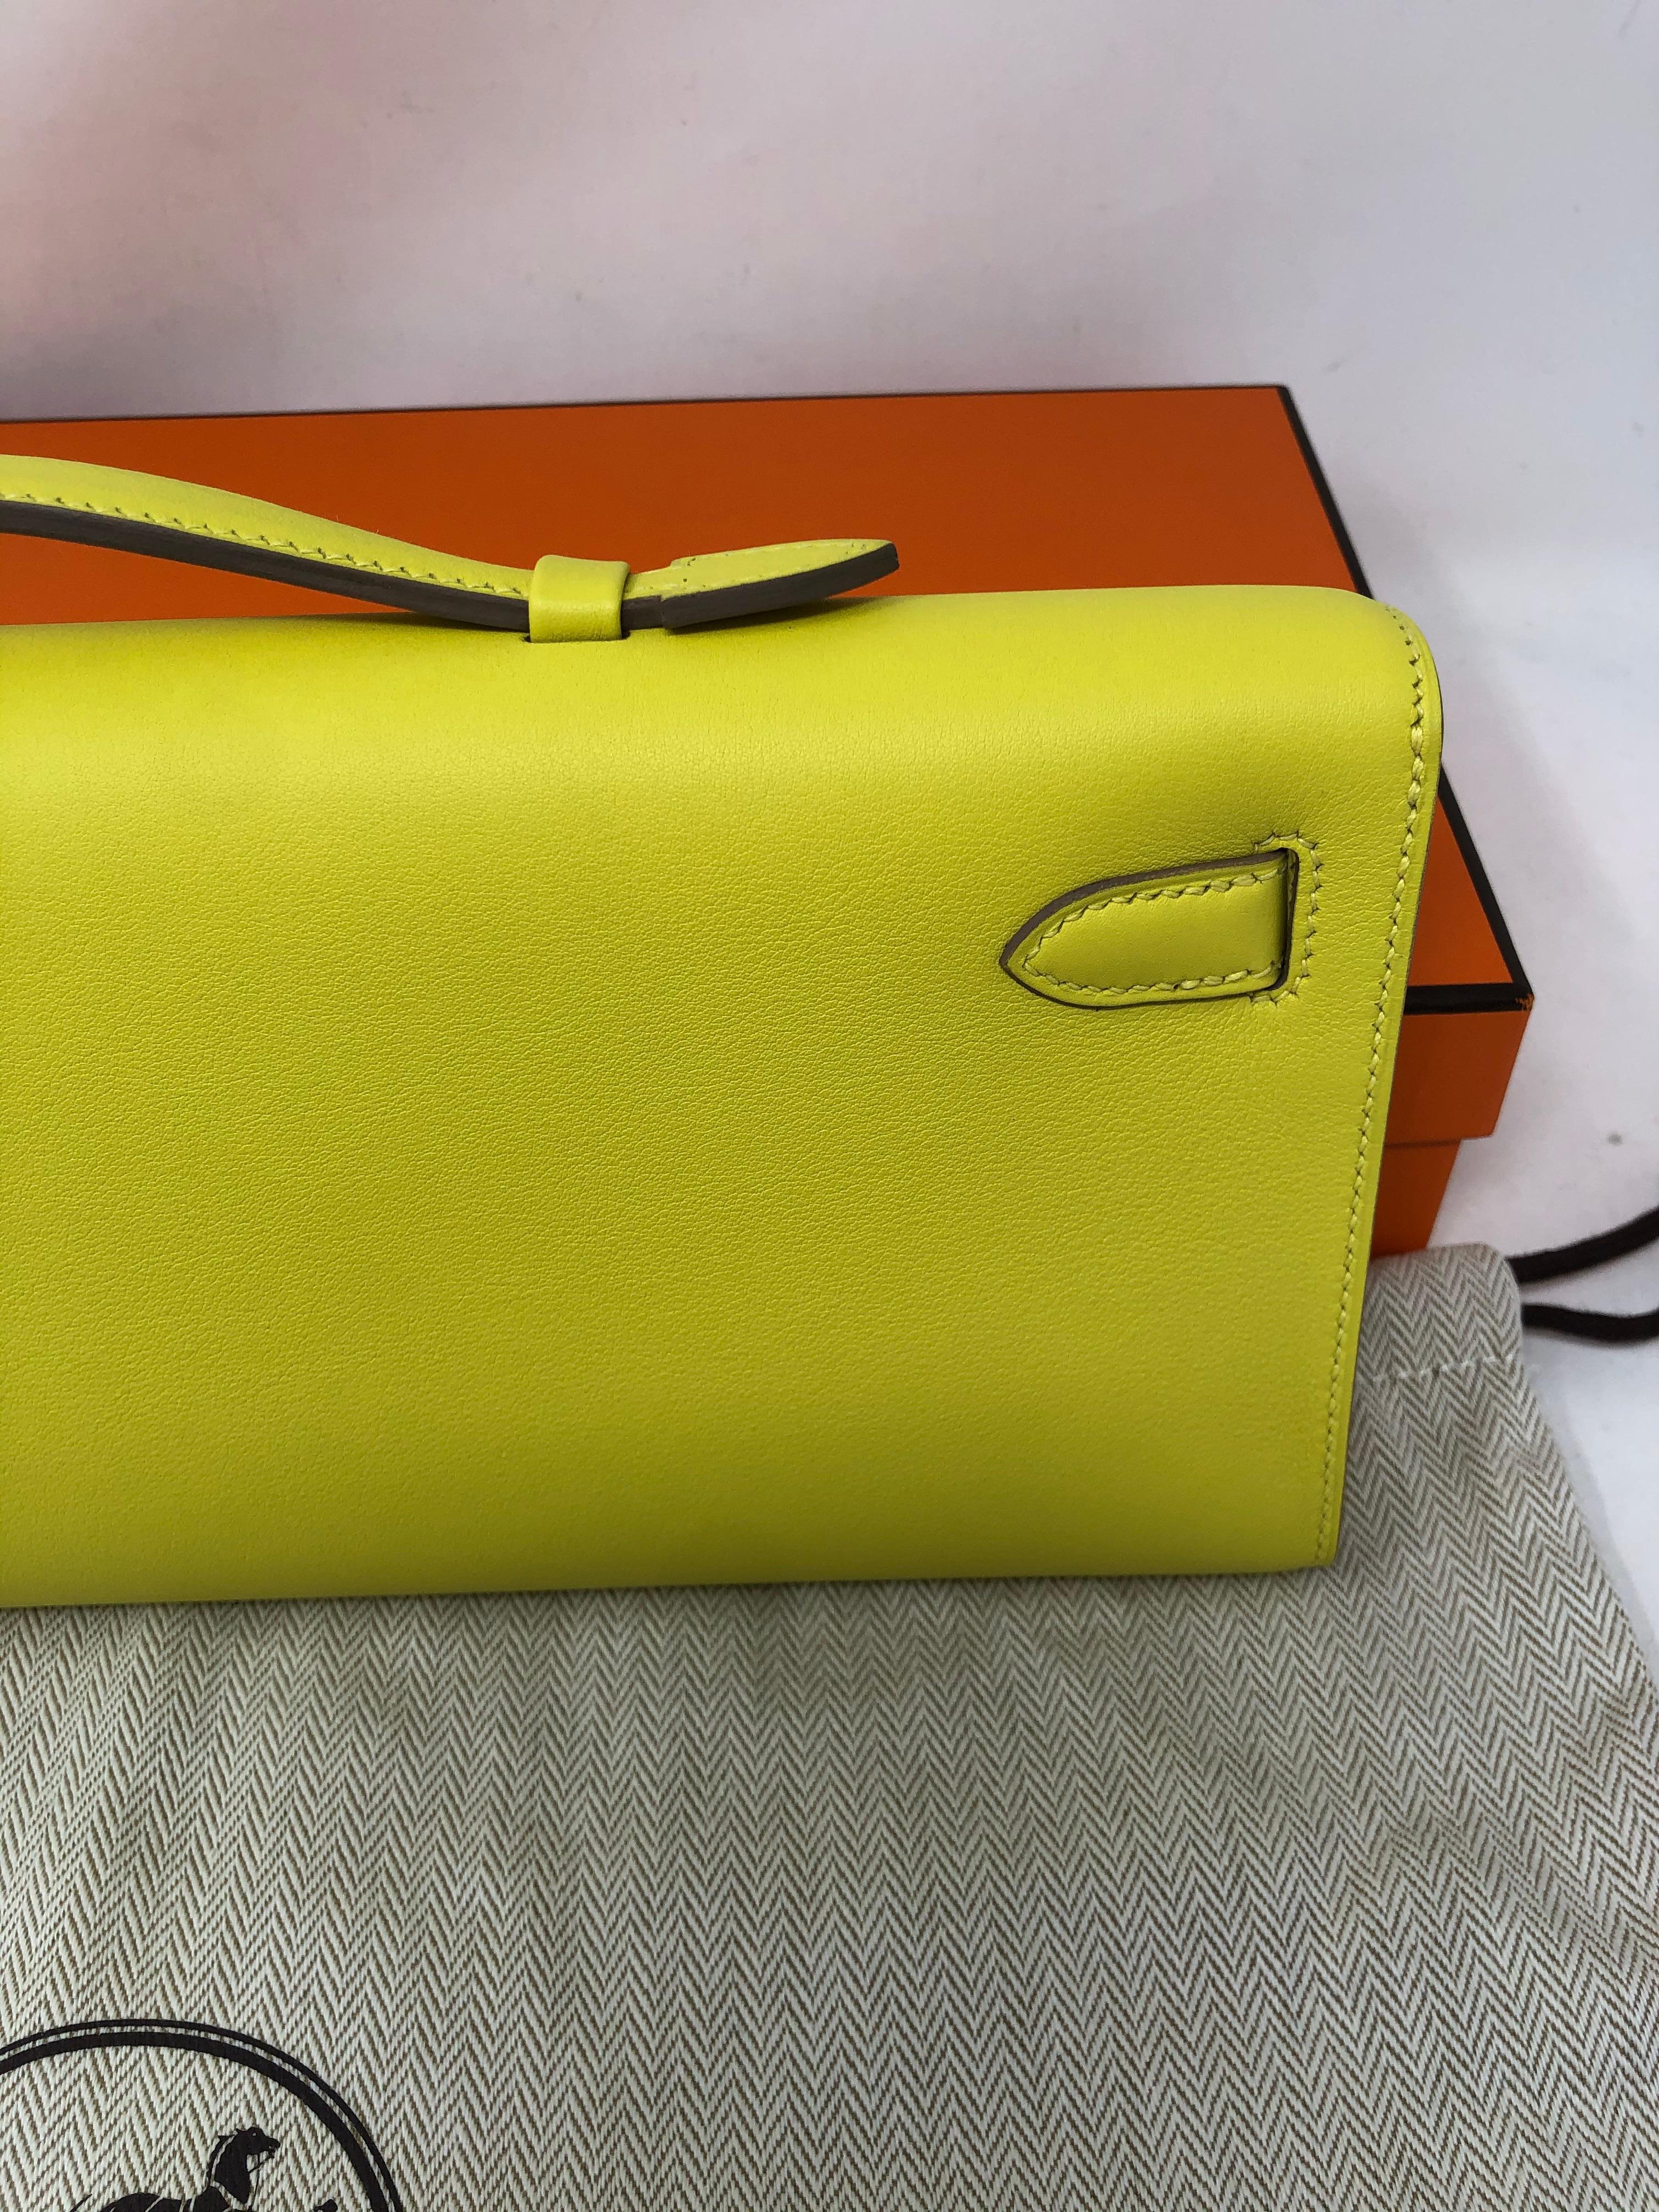 Hermes Swift Leather Kelly Cut Clutch in Yellow. Brand new Kelly Clutch with gold hardware. From 2019. Bright canary yellow in swift leather. Hard to get and rare. Never used. Plastic still on hardware. Don't miss out on this one. Includes original